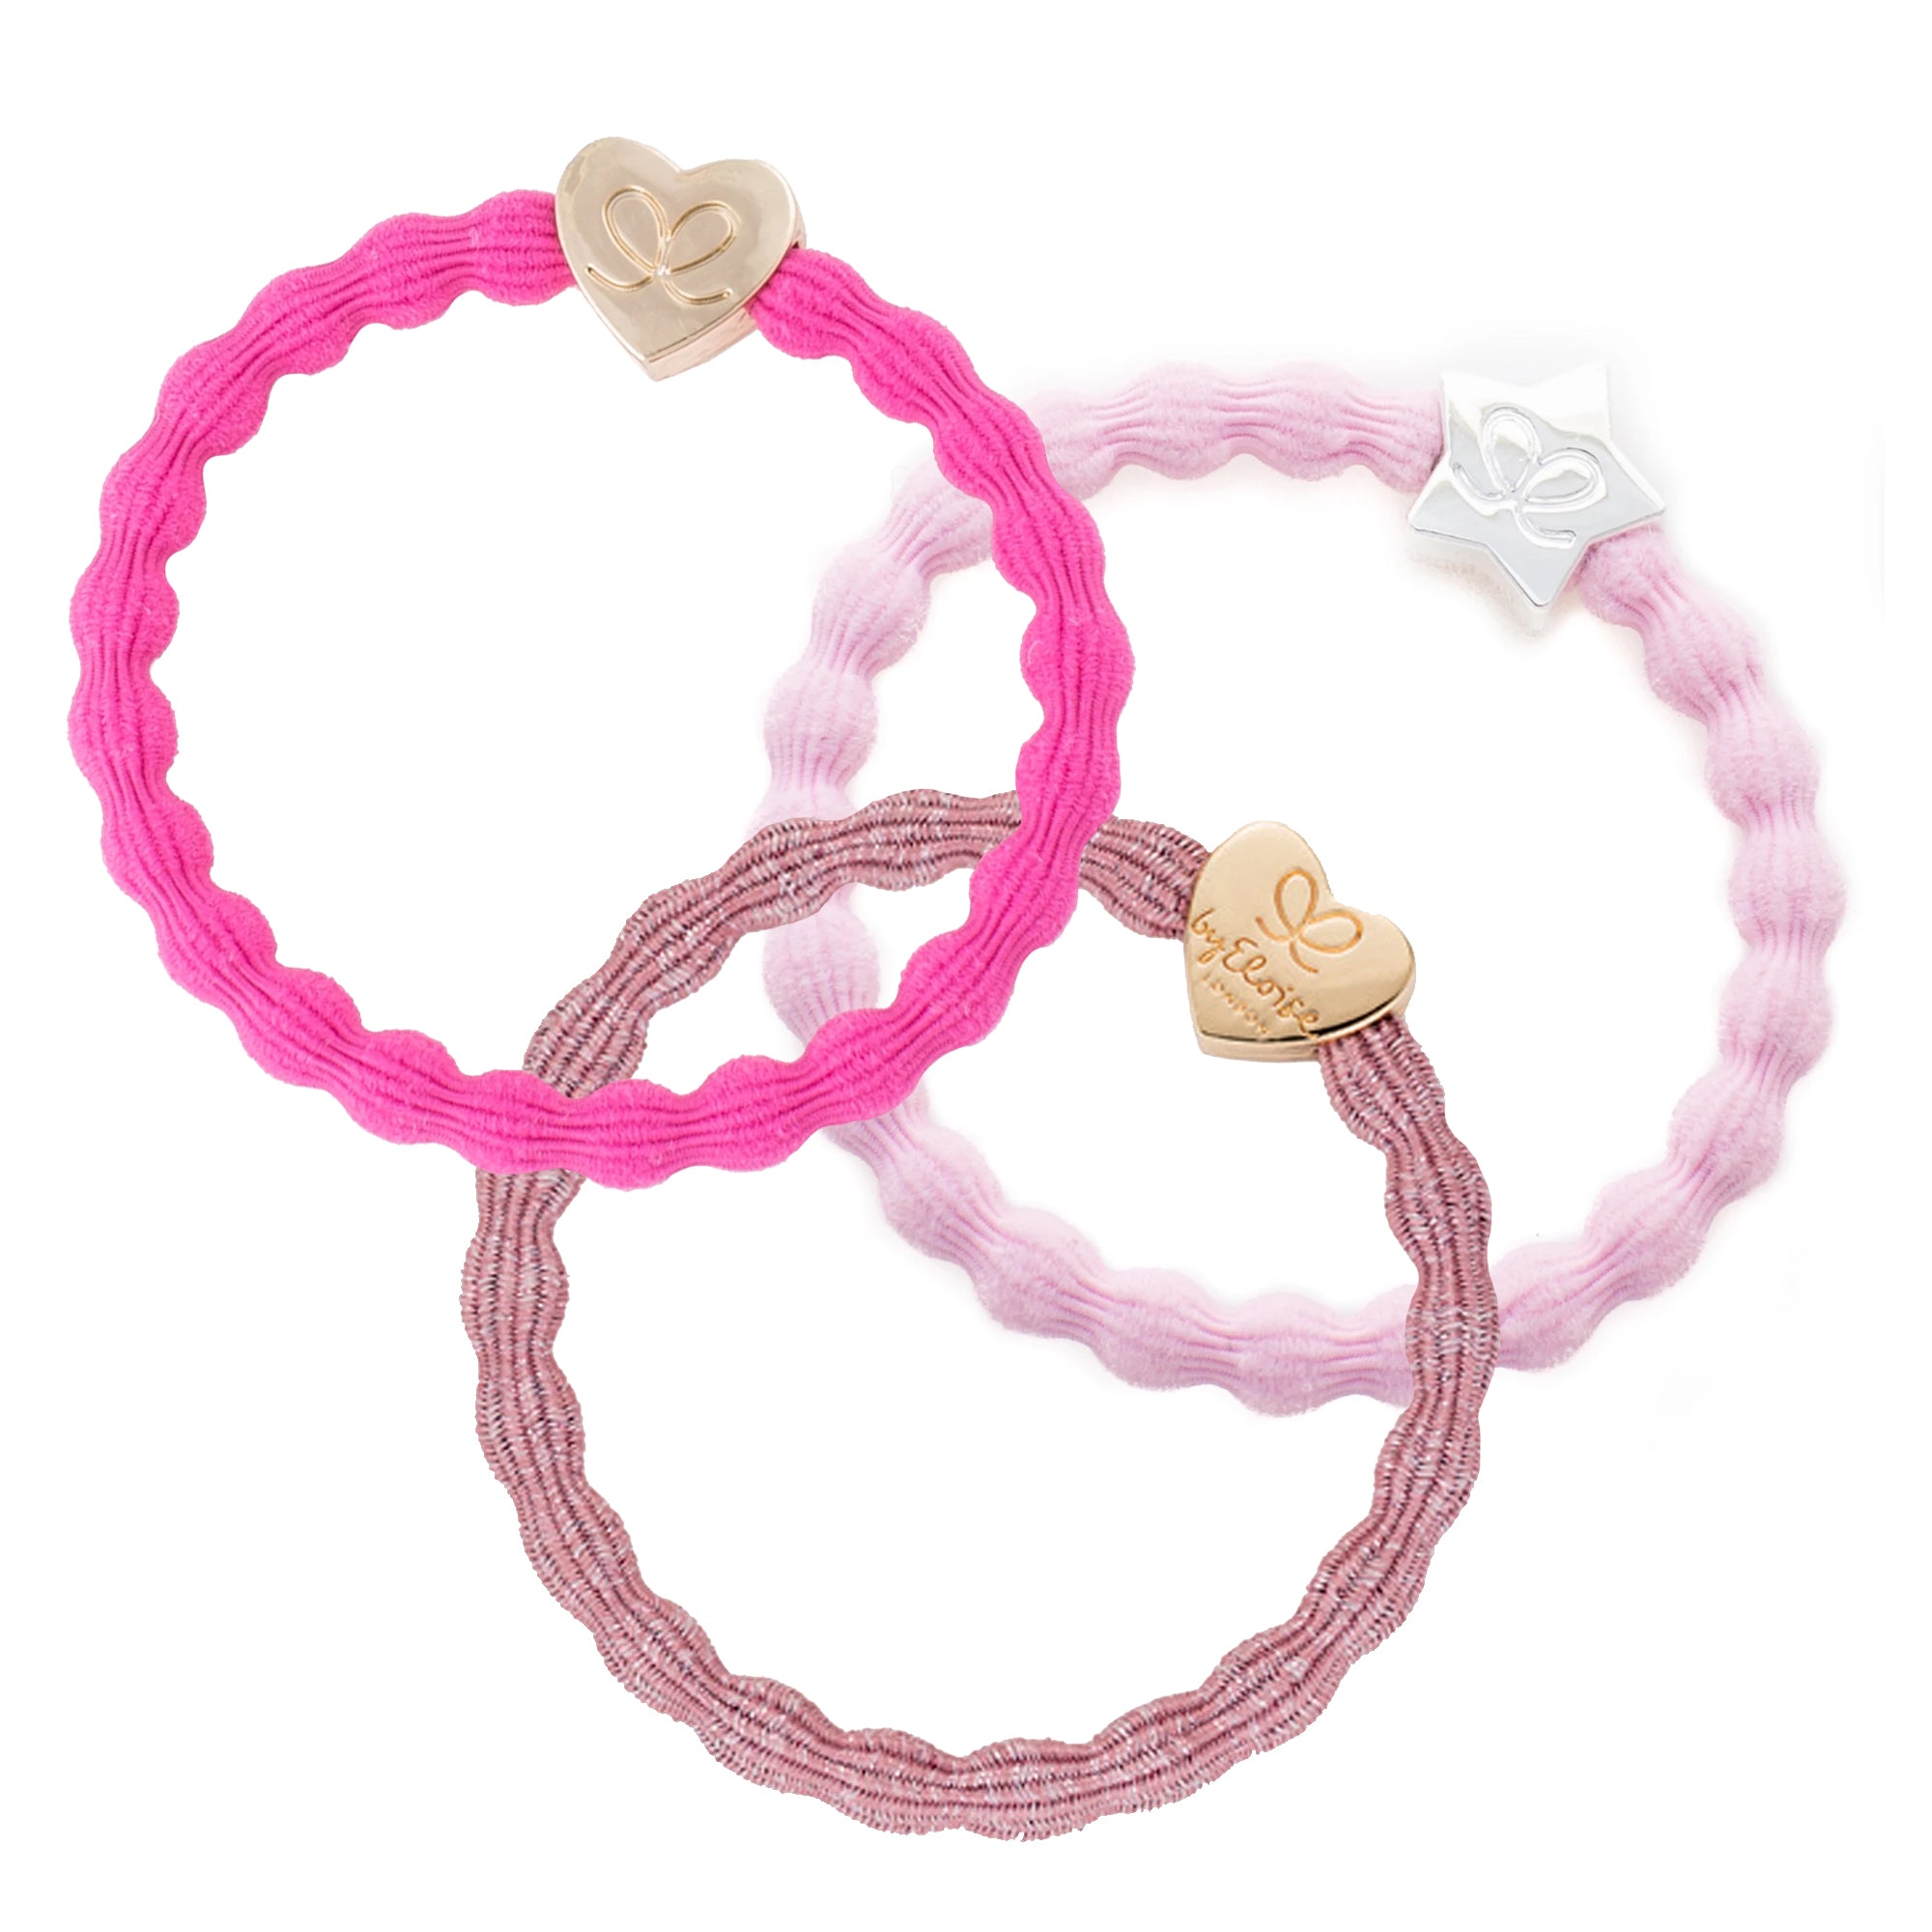 Pretty in Pink 3 Bangle Bands Set